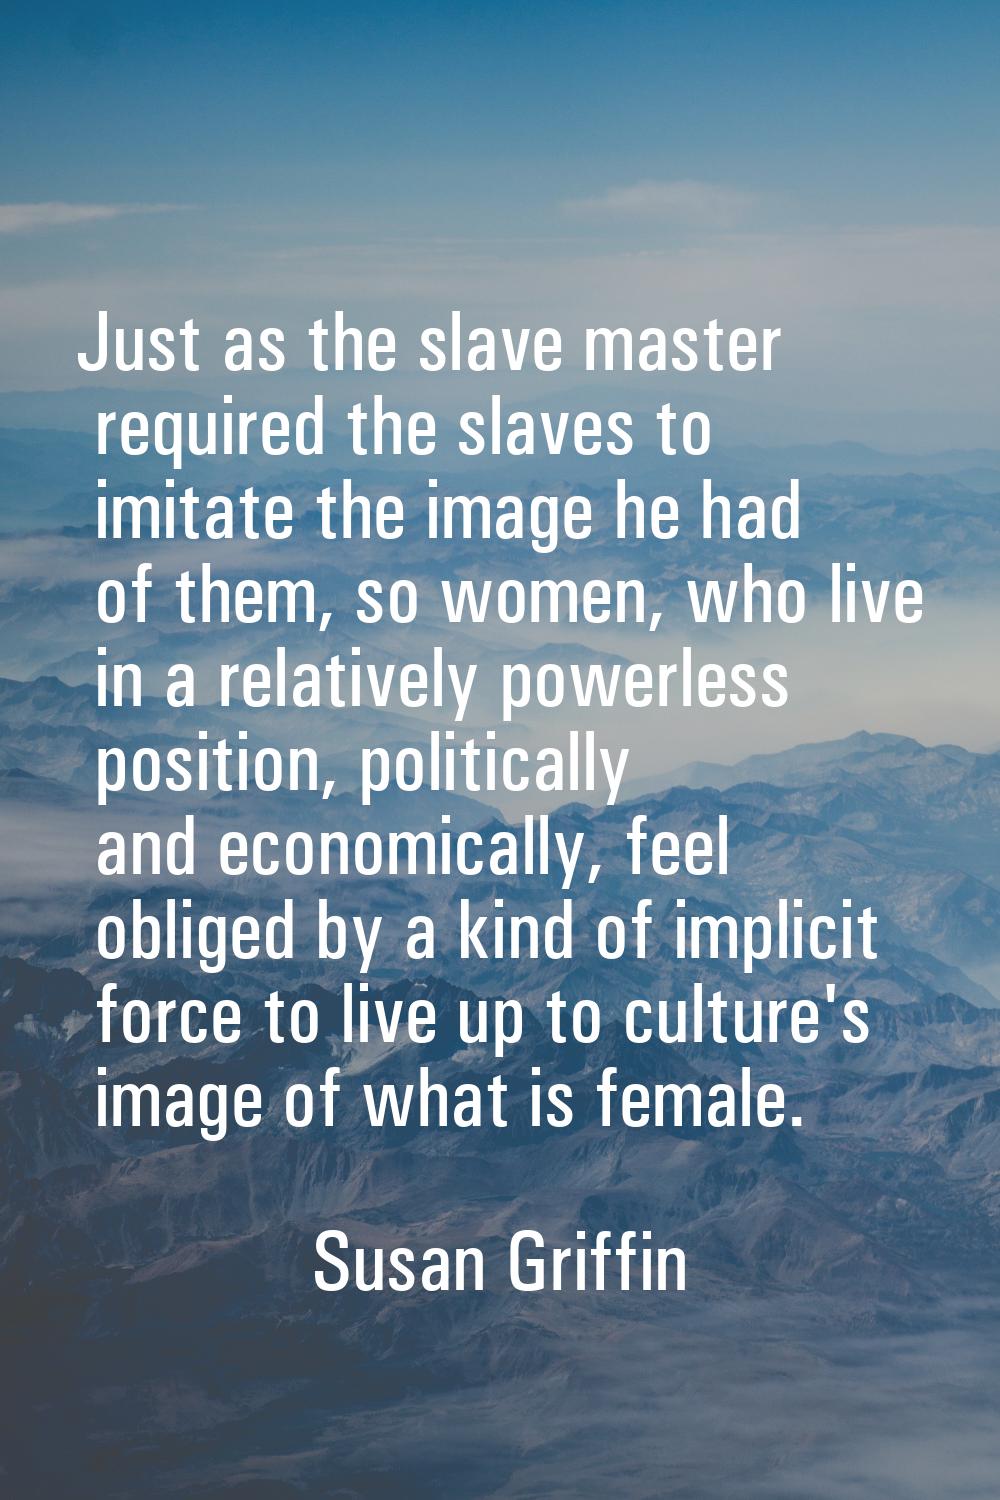 Just as the slave master required the slaves to imitate the image he had of them, so women, who liv